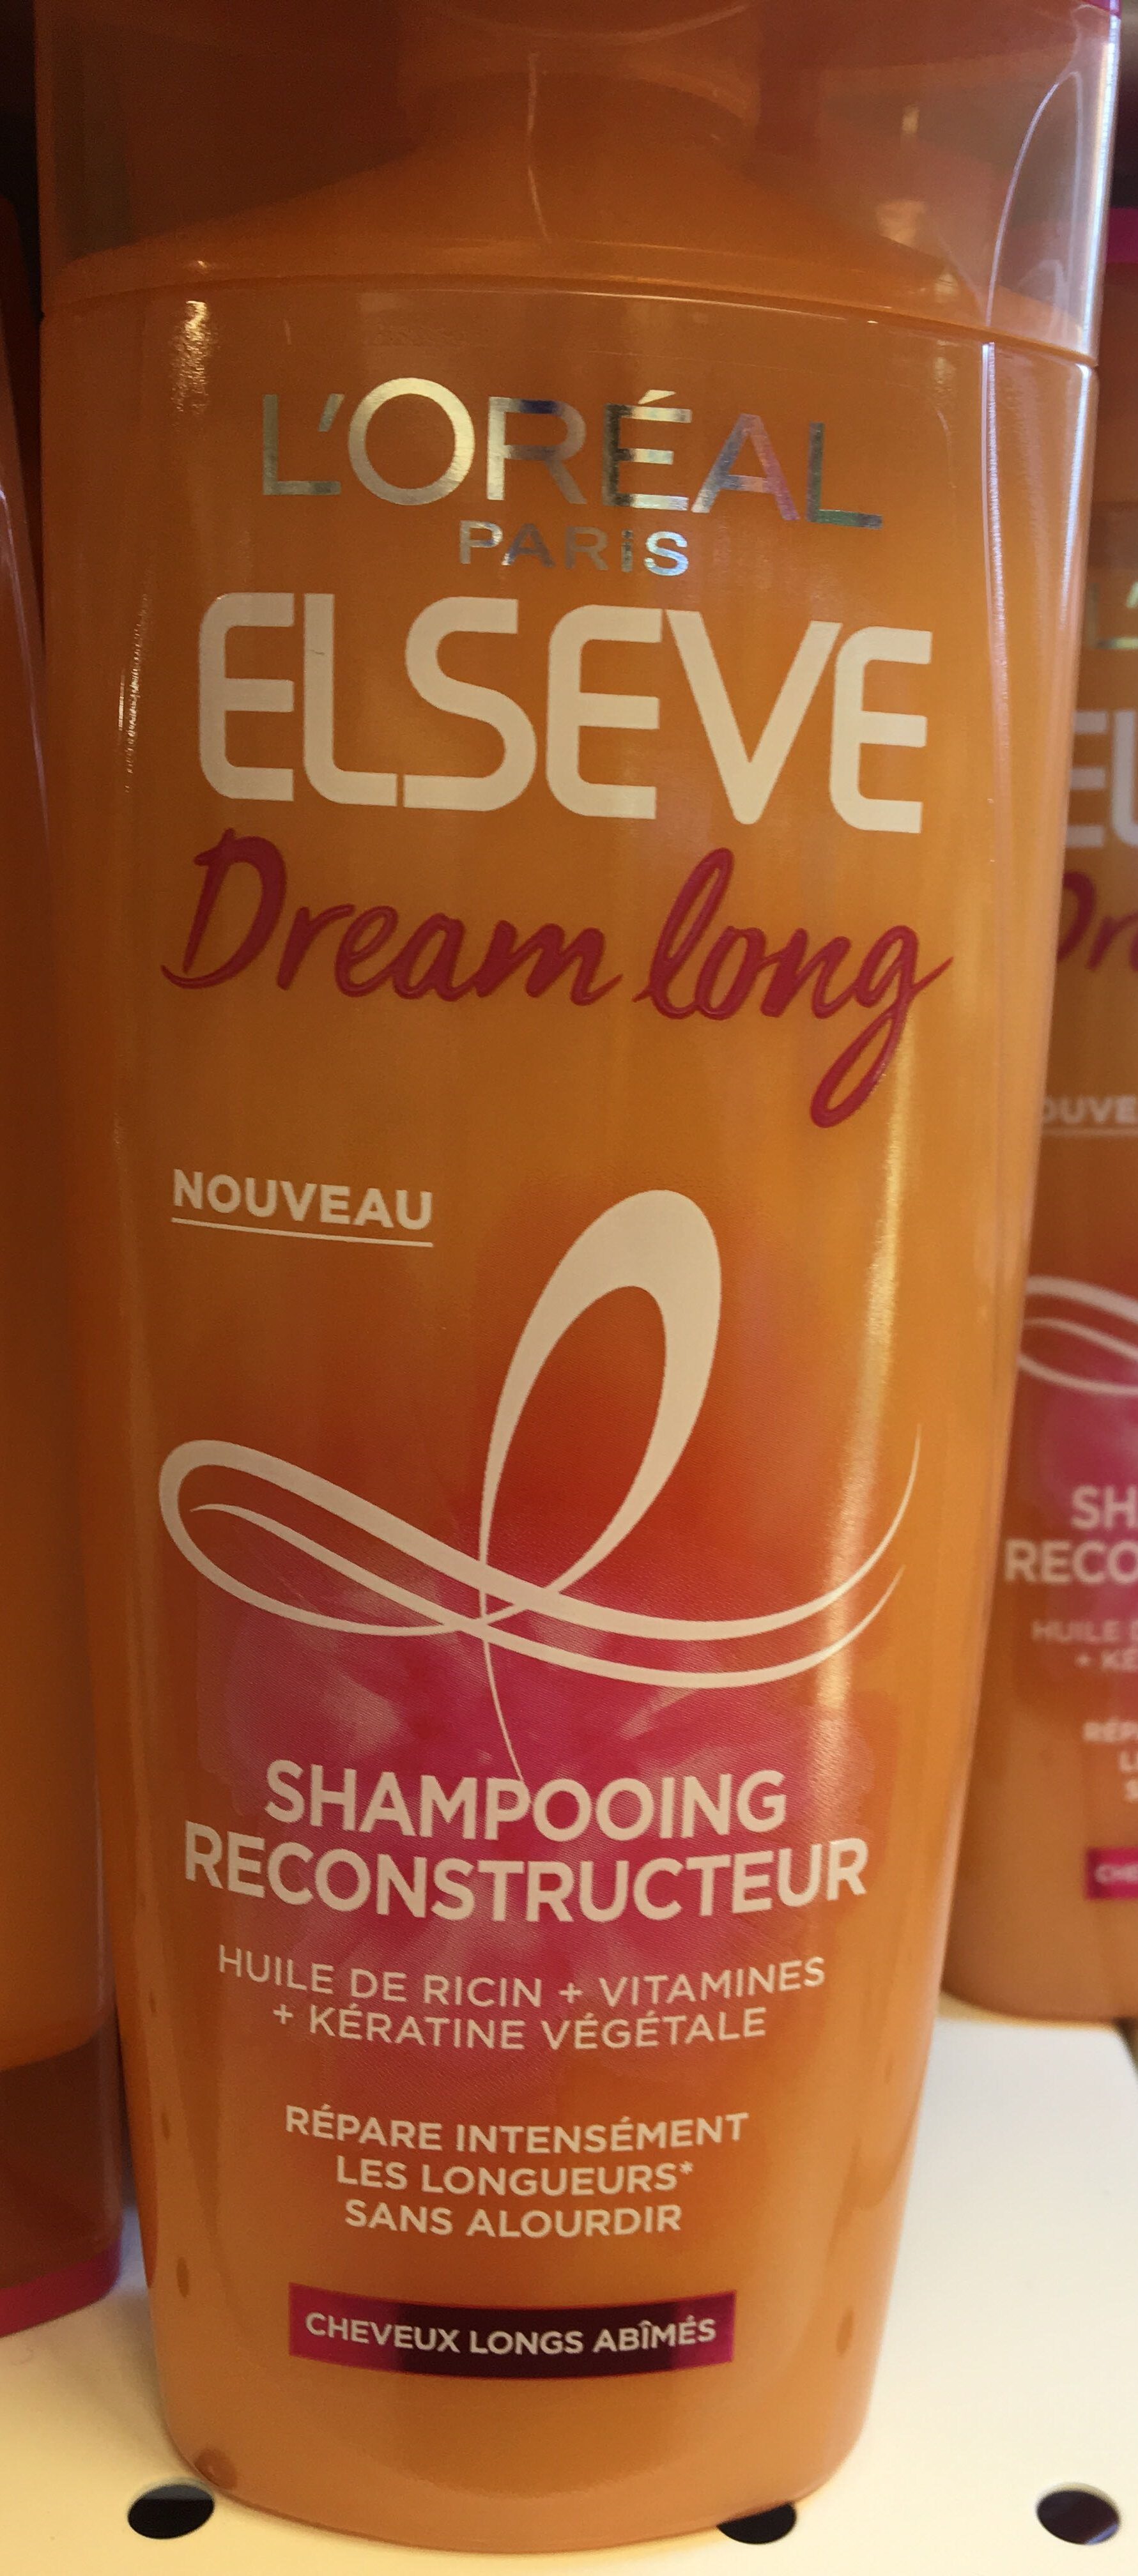 Shampoing reconstructeur - Product - fr